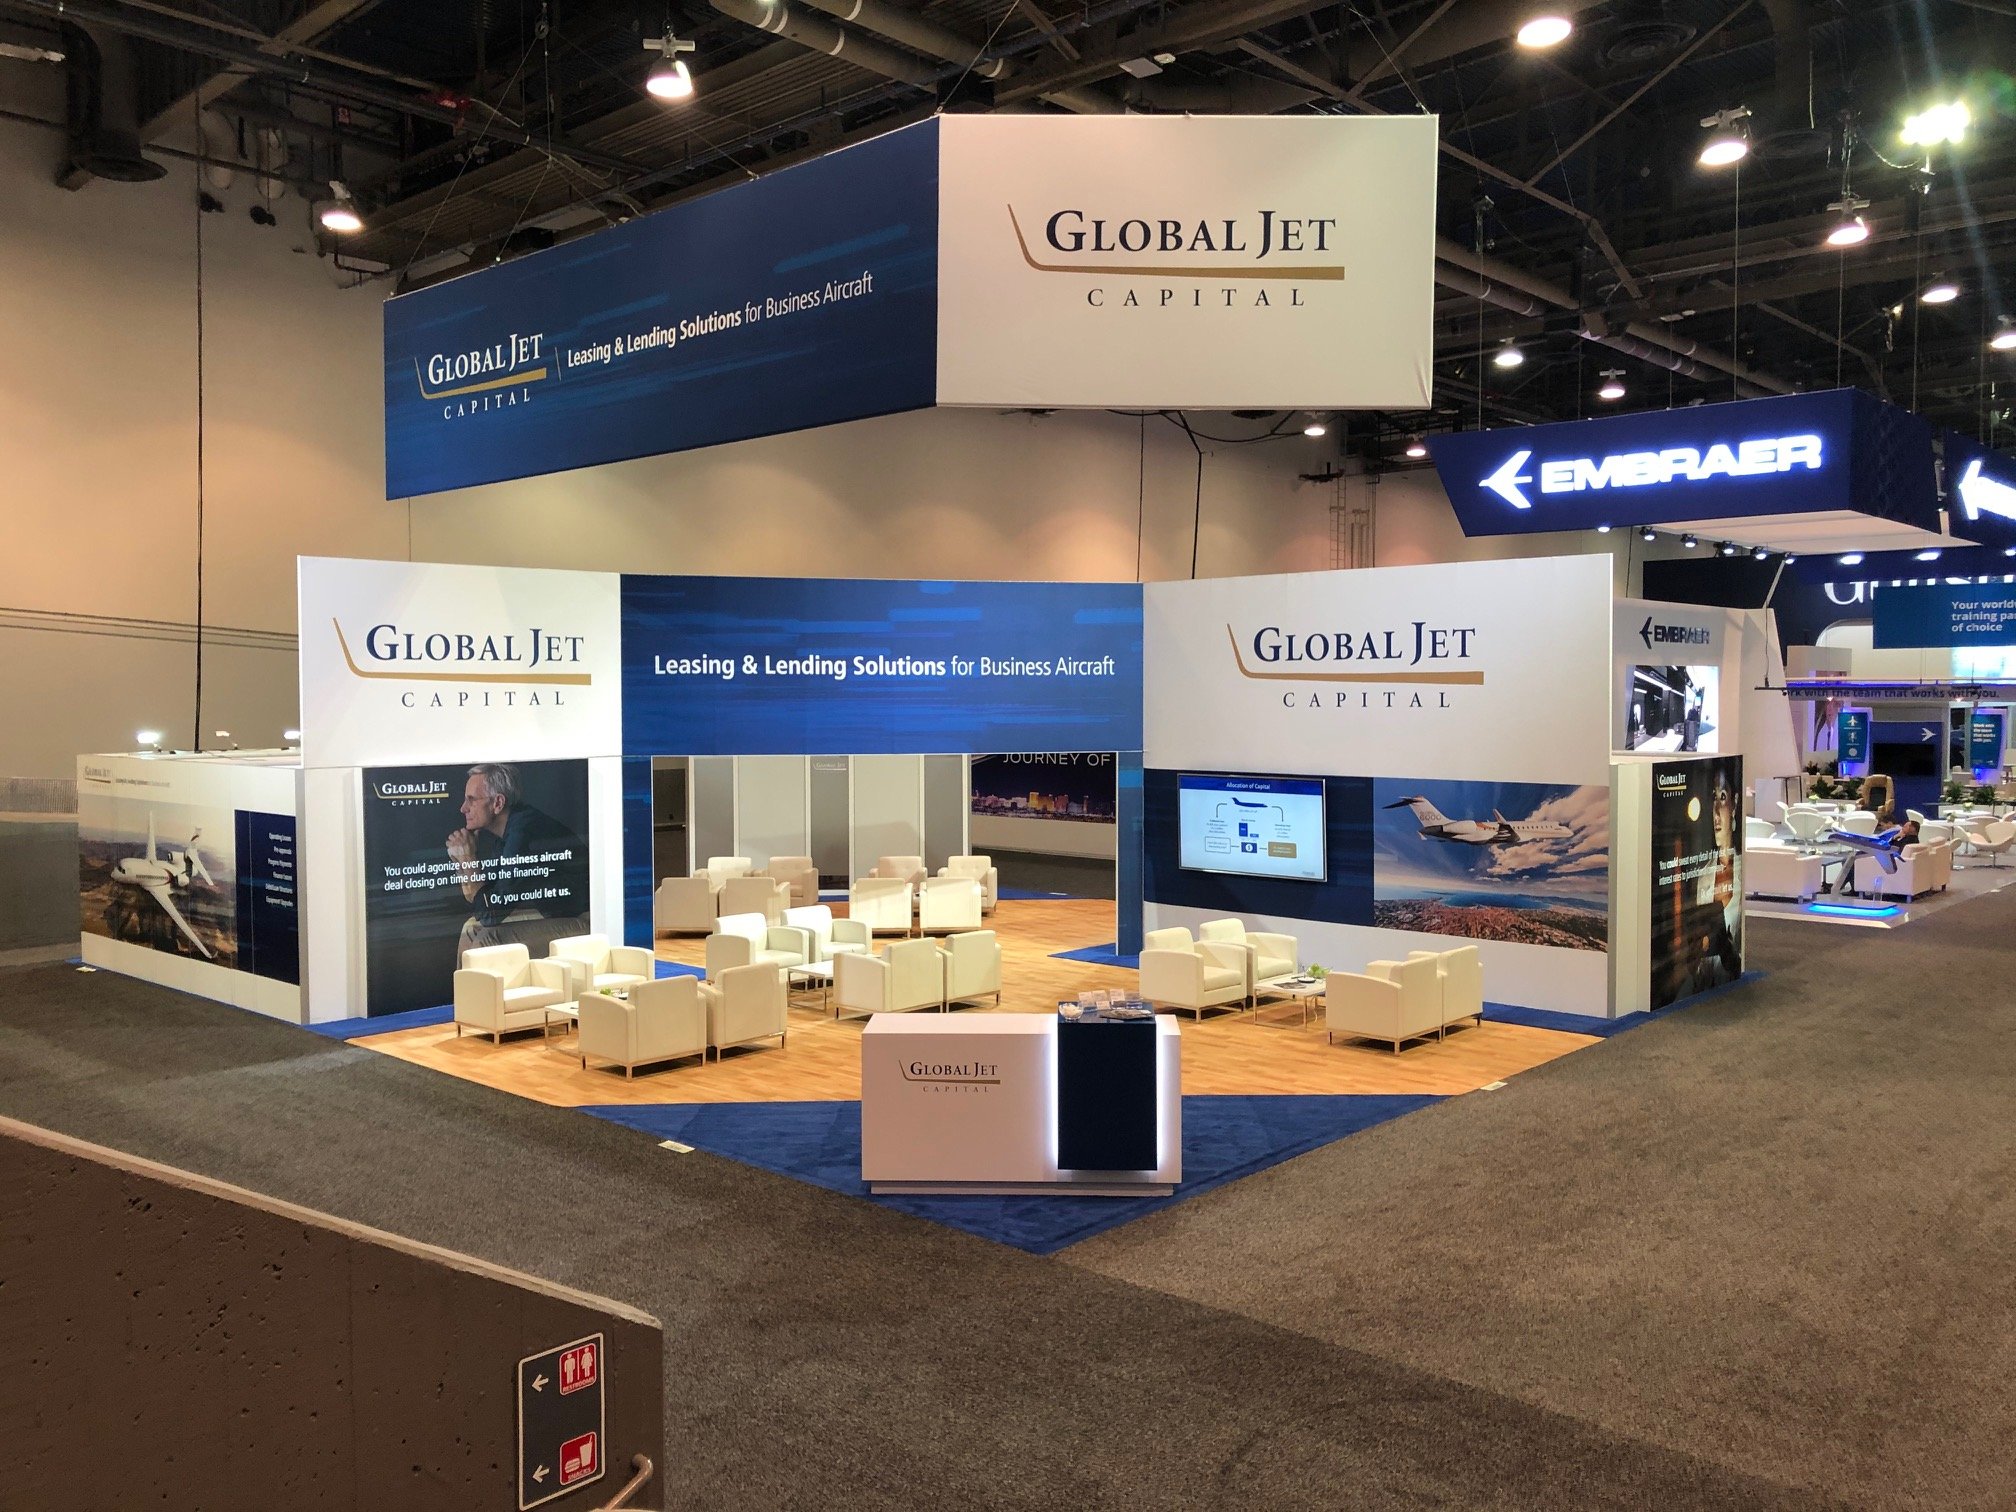 Global Jet Capital Launches at the NBAA Convention in Orlando